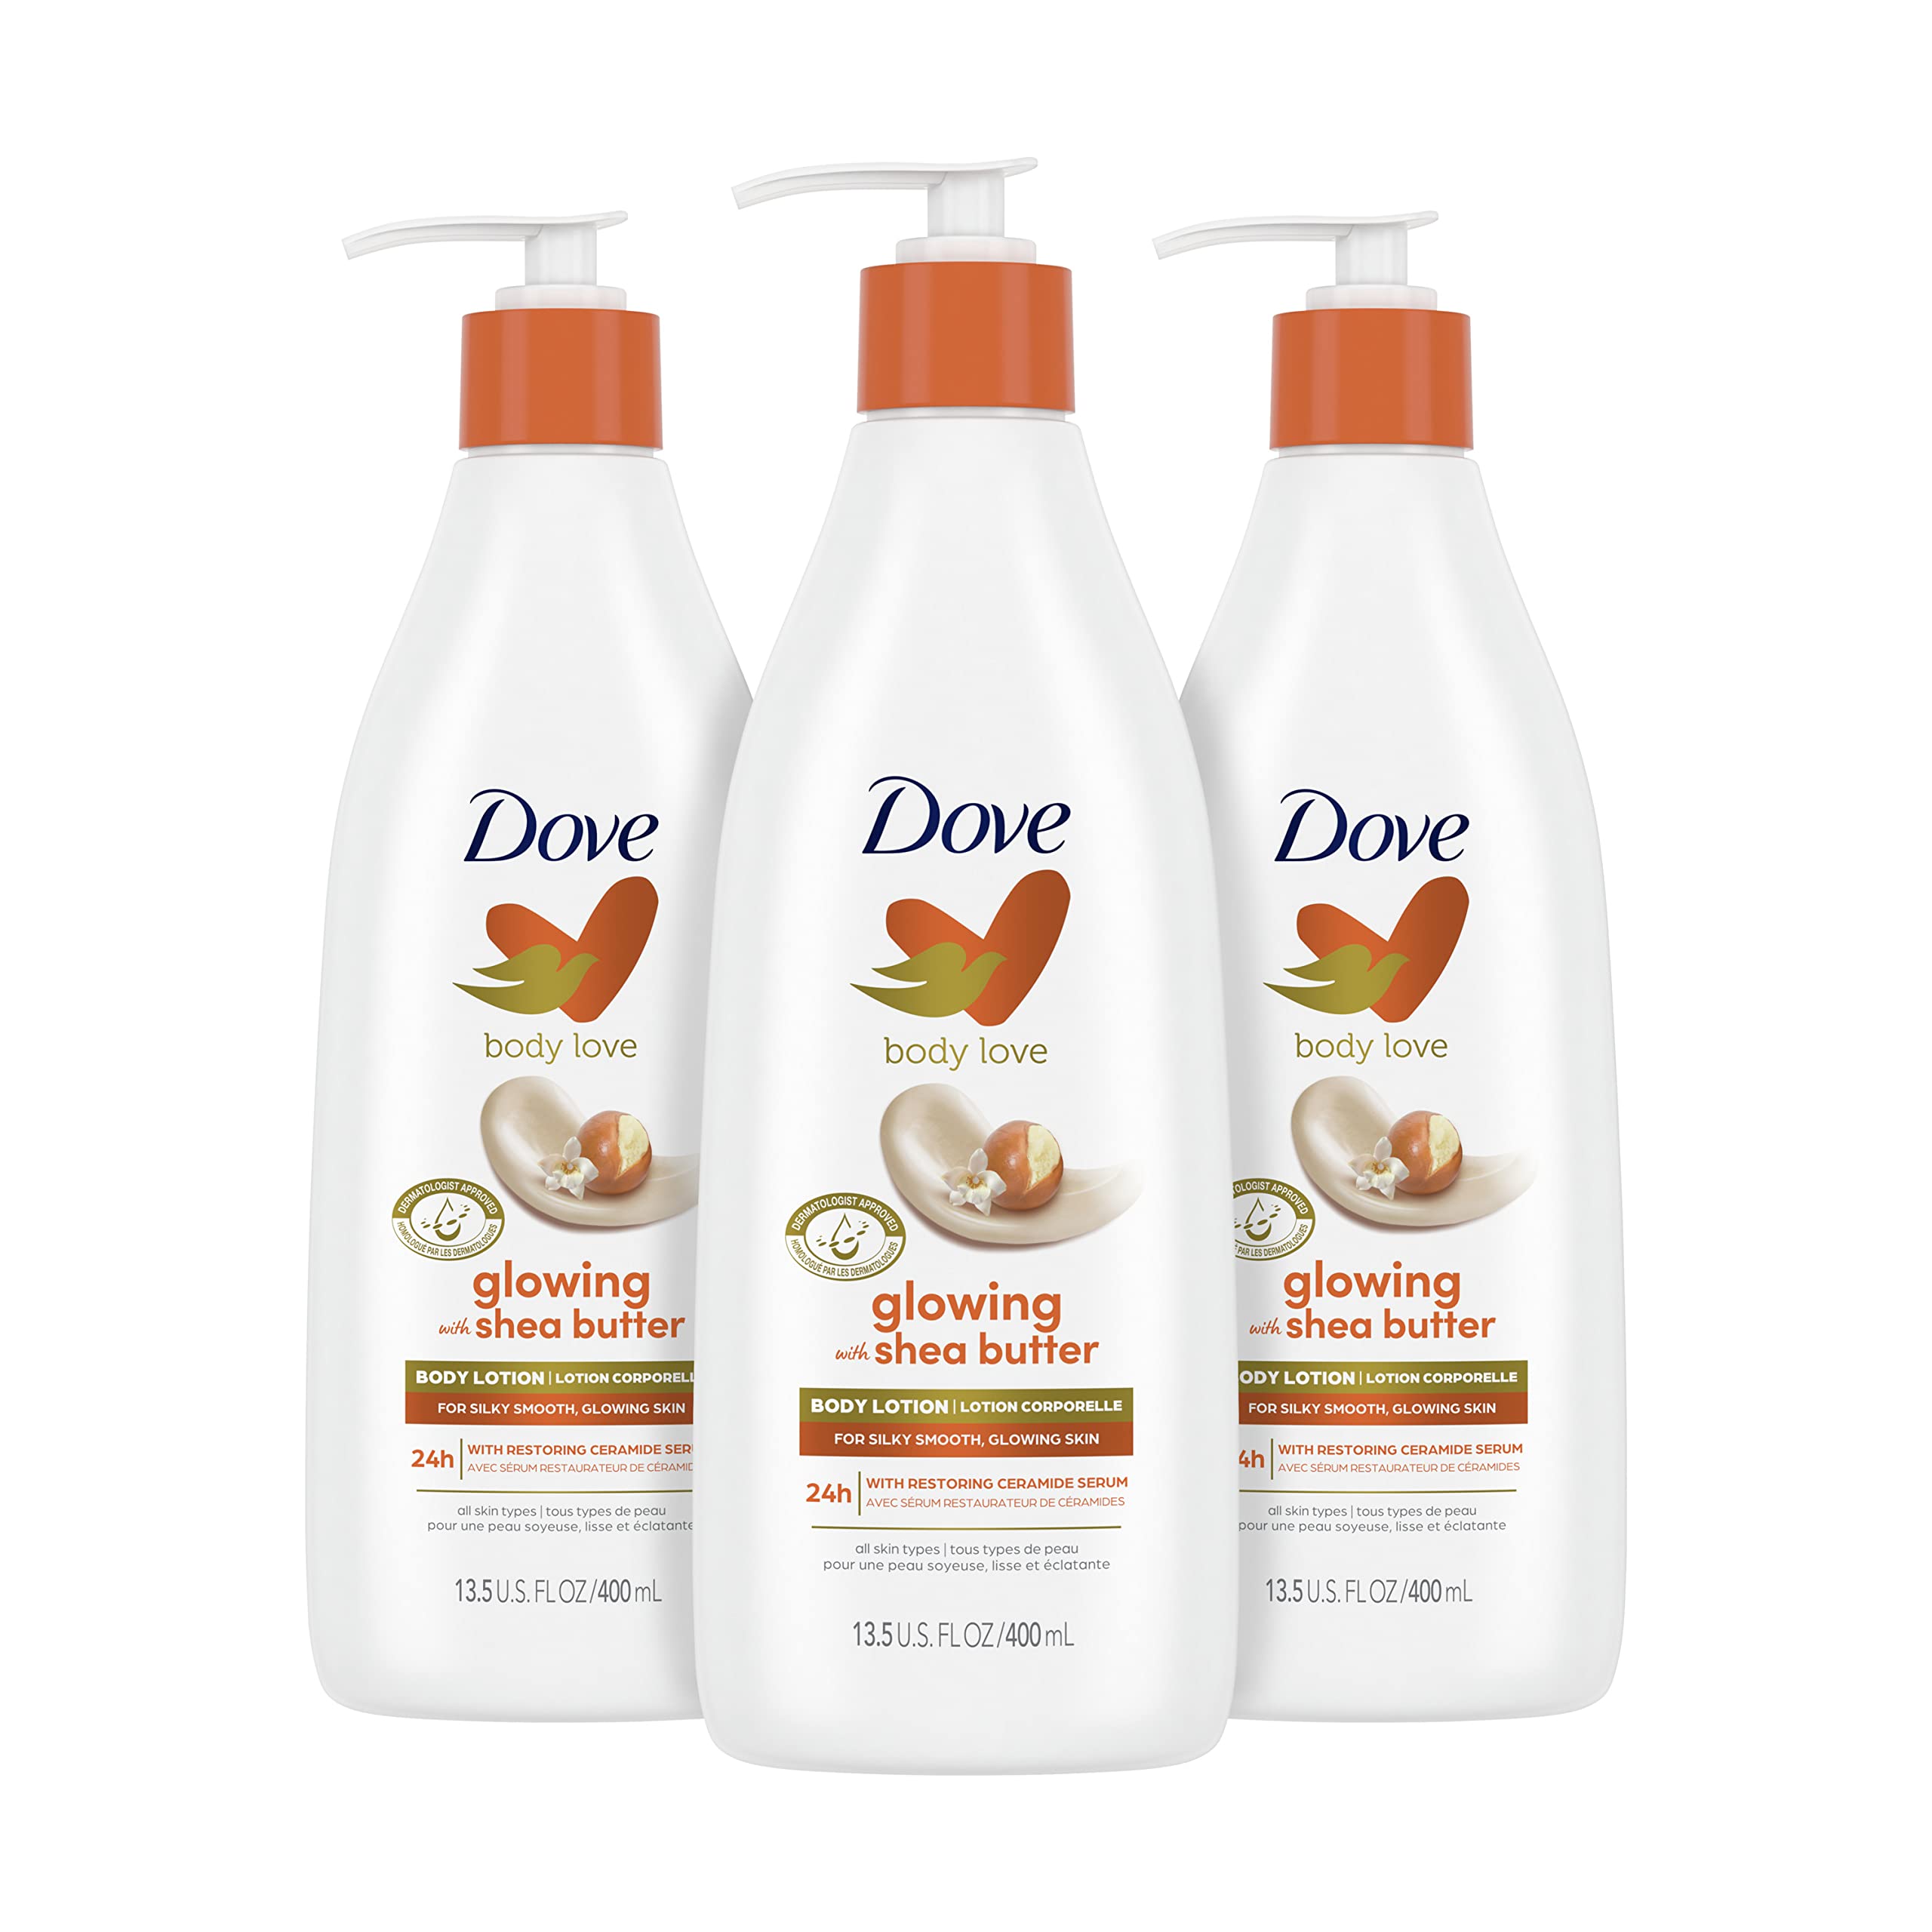 Dove Body Love Pampering Body Lotion Shea Butter Pack of 3 for Silky, Smooth Skin Softens & Smoothes Dry Skin 13.5oz